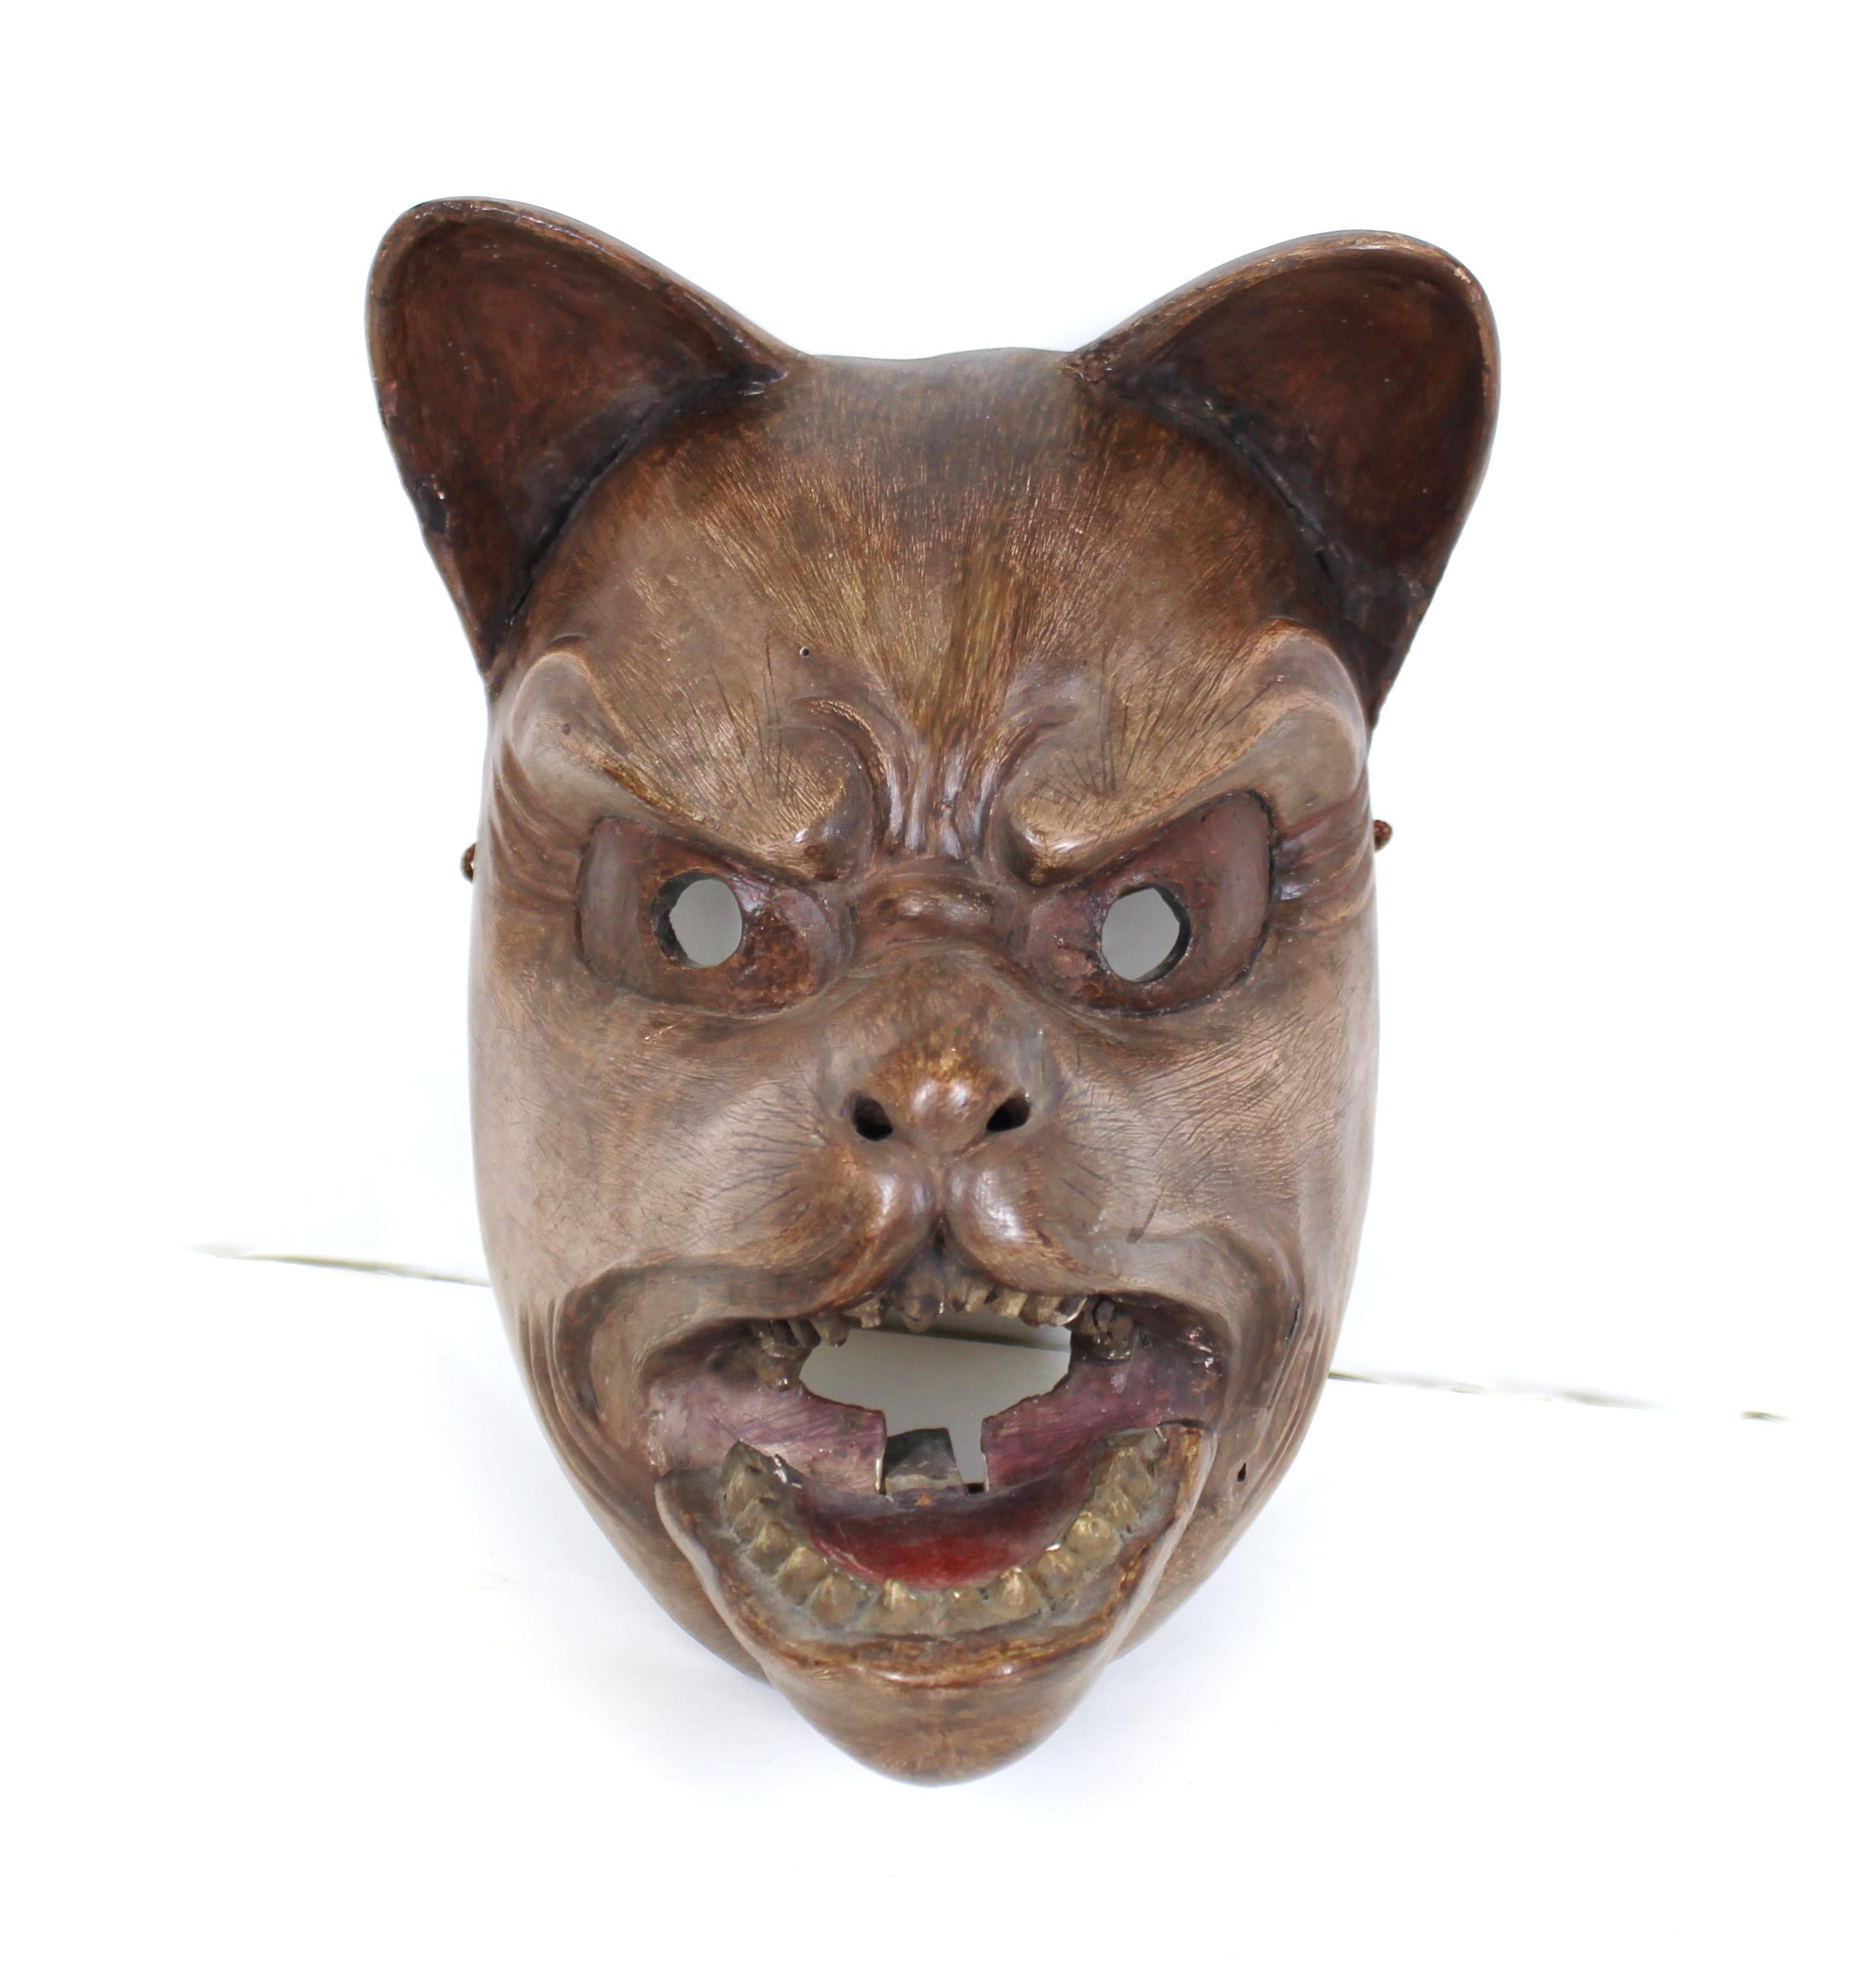 Japanese Edo period carved wood theatrical animal mask of a fox, with articulated jaw. The piece has a detailed expressive face and was carved during the early 18th century, circa 1720. In remarkable antique condition with age-appropriate wear and